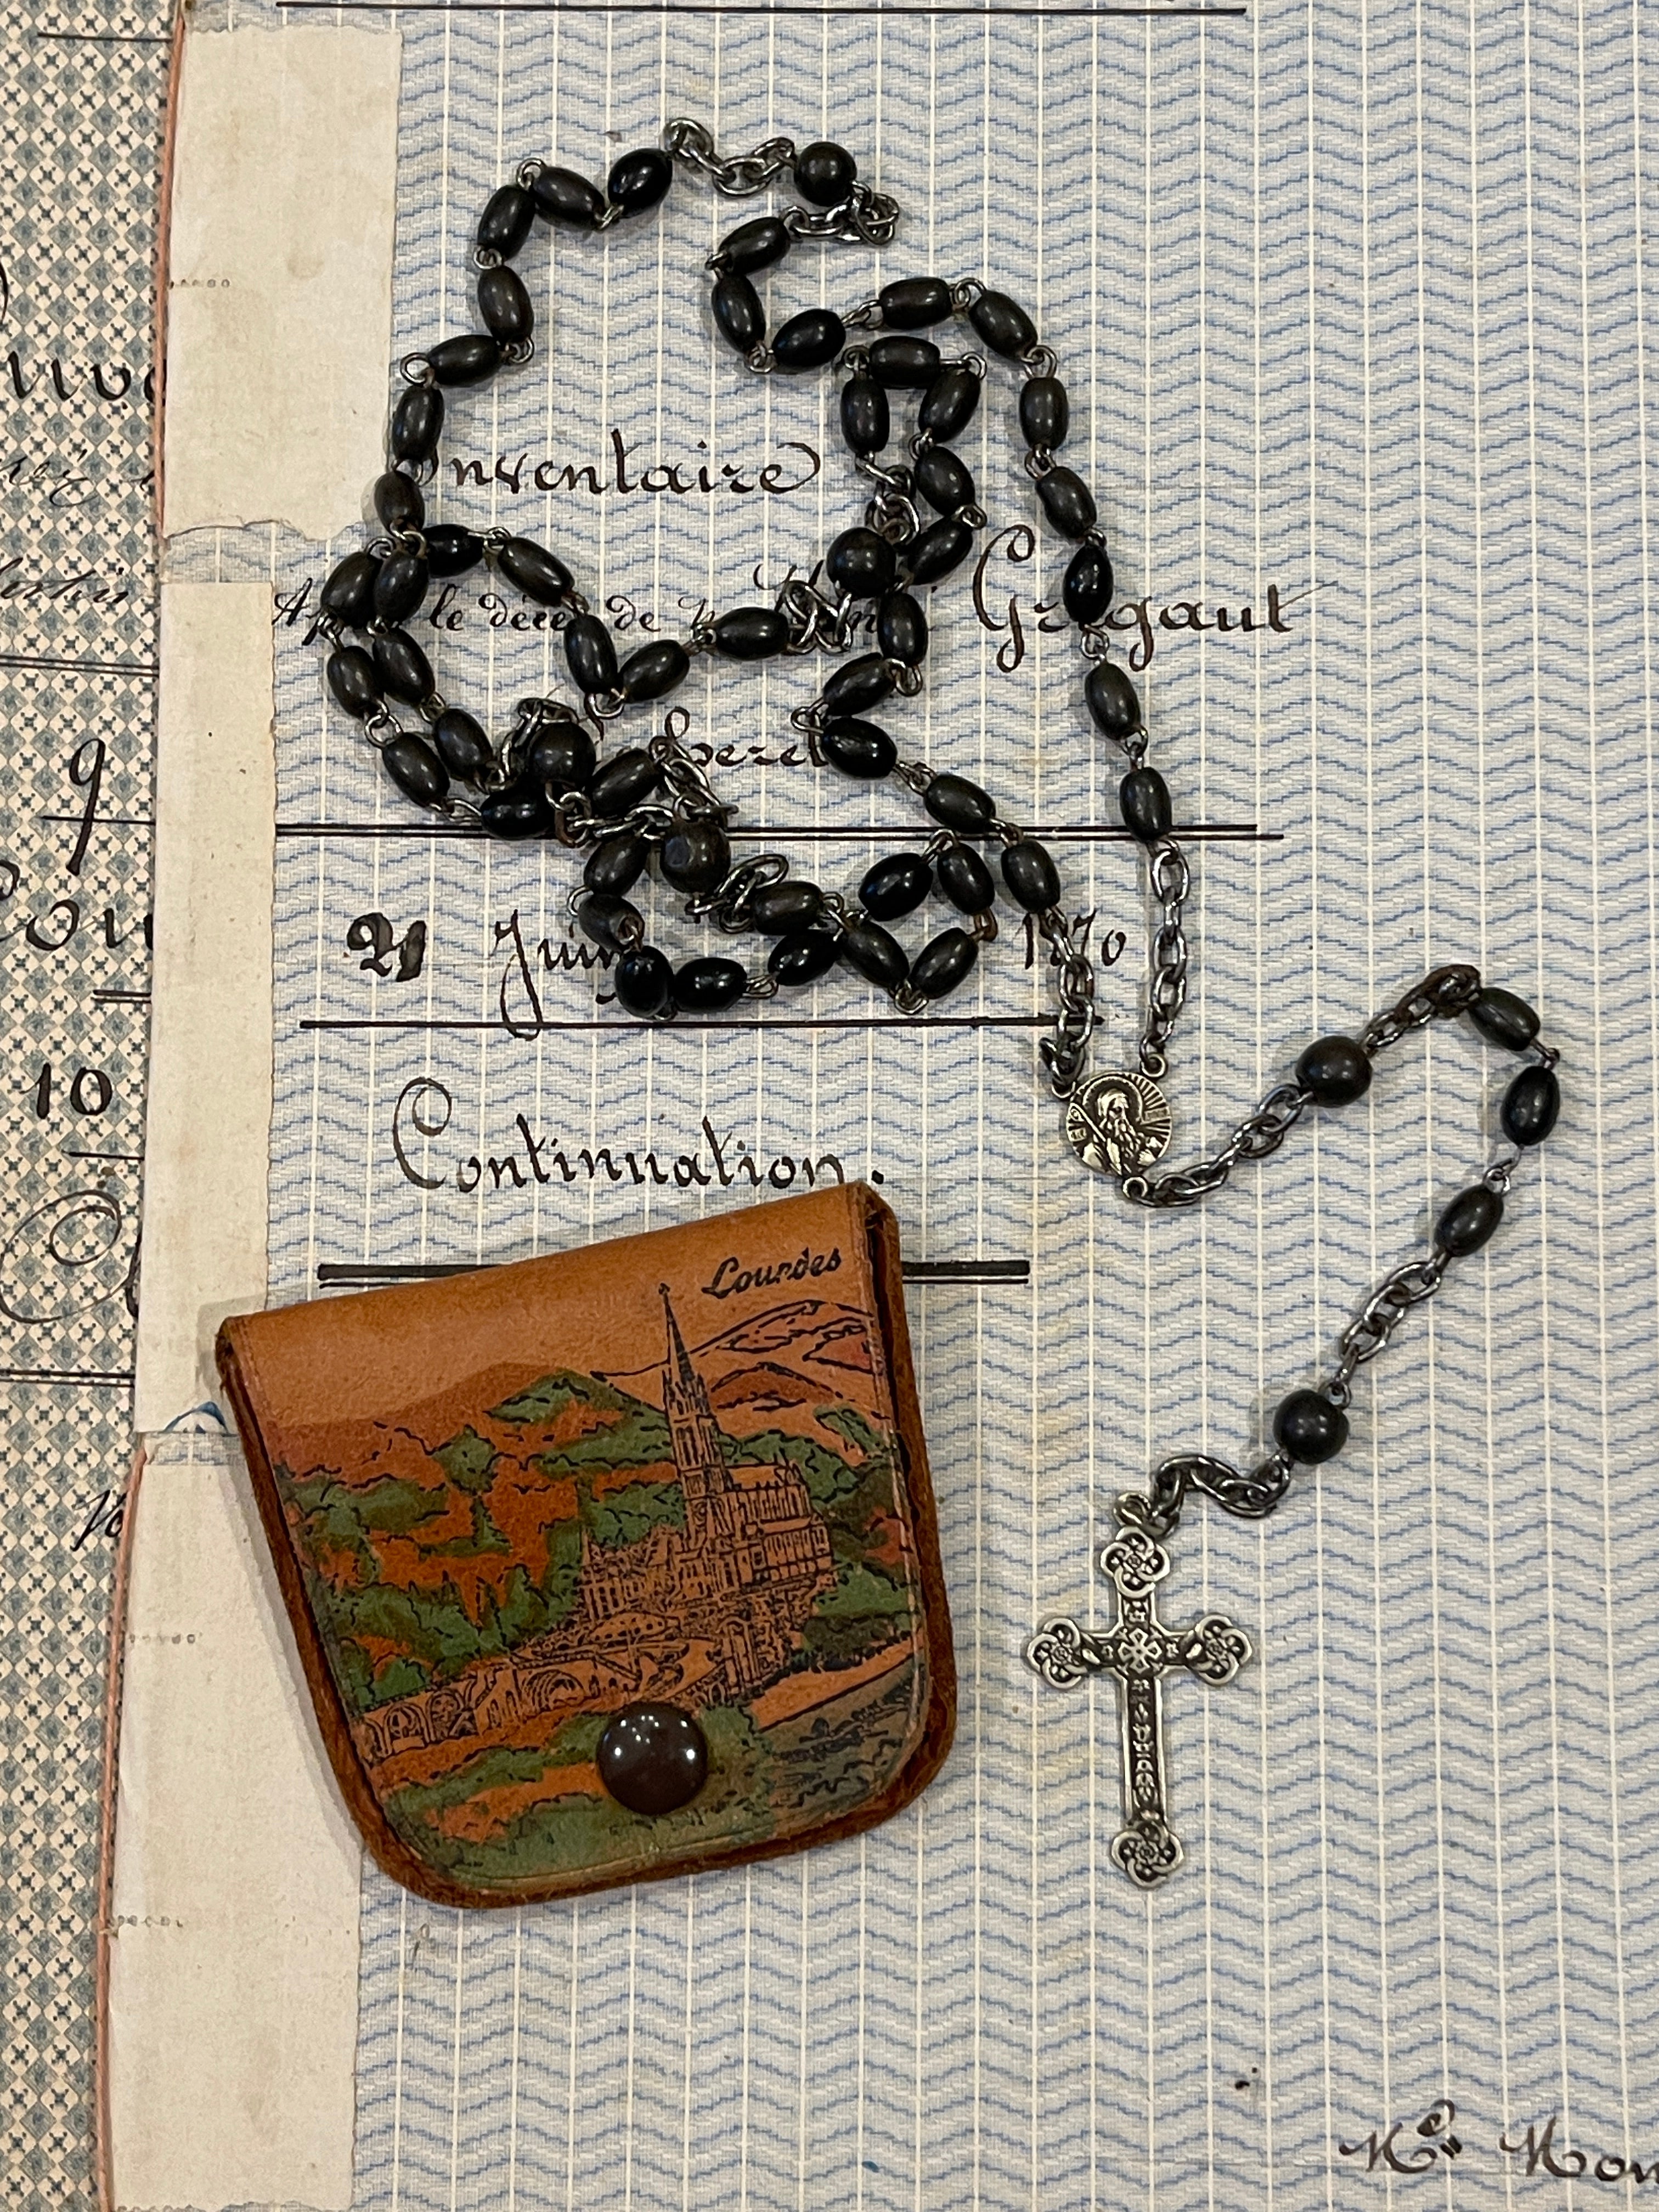 Antique French Rosary in case from Lourdes - ROS11